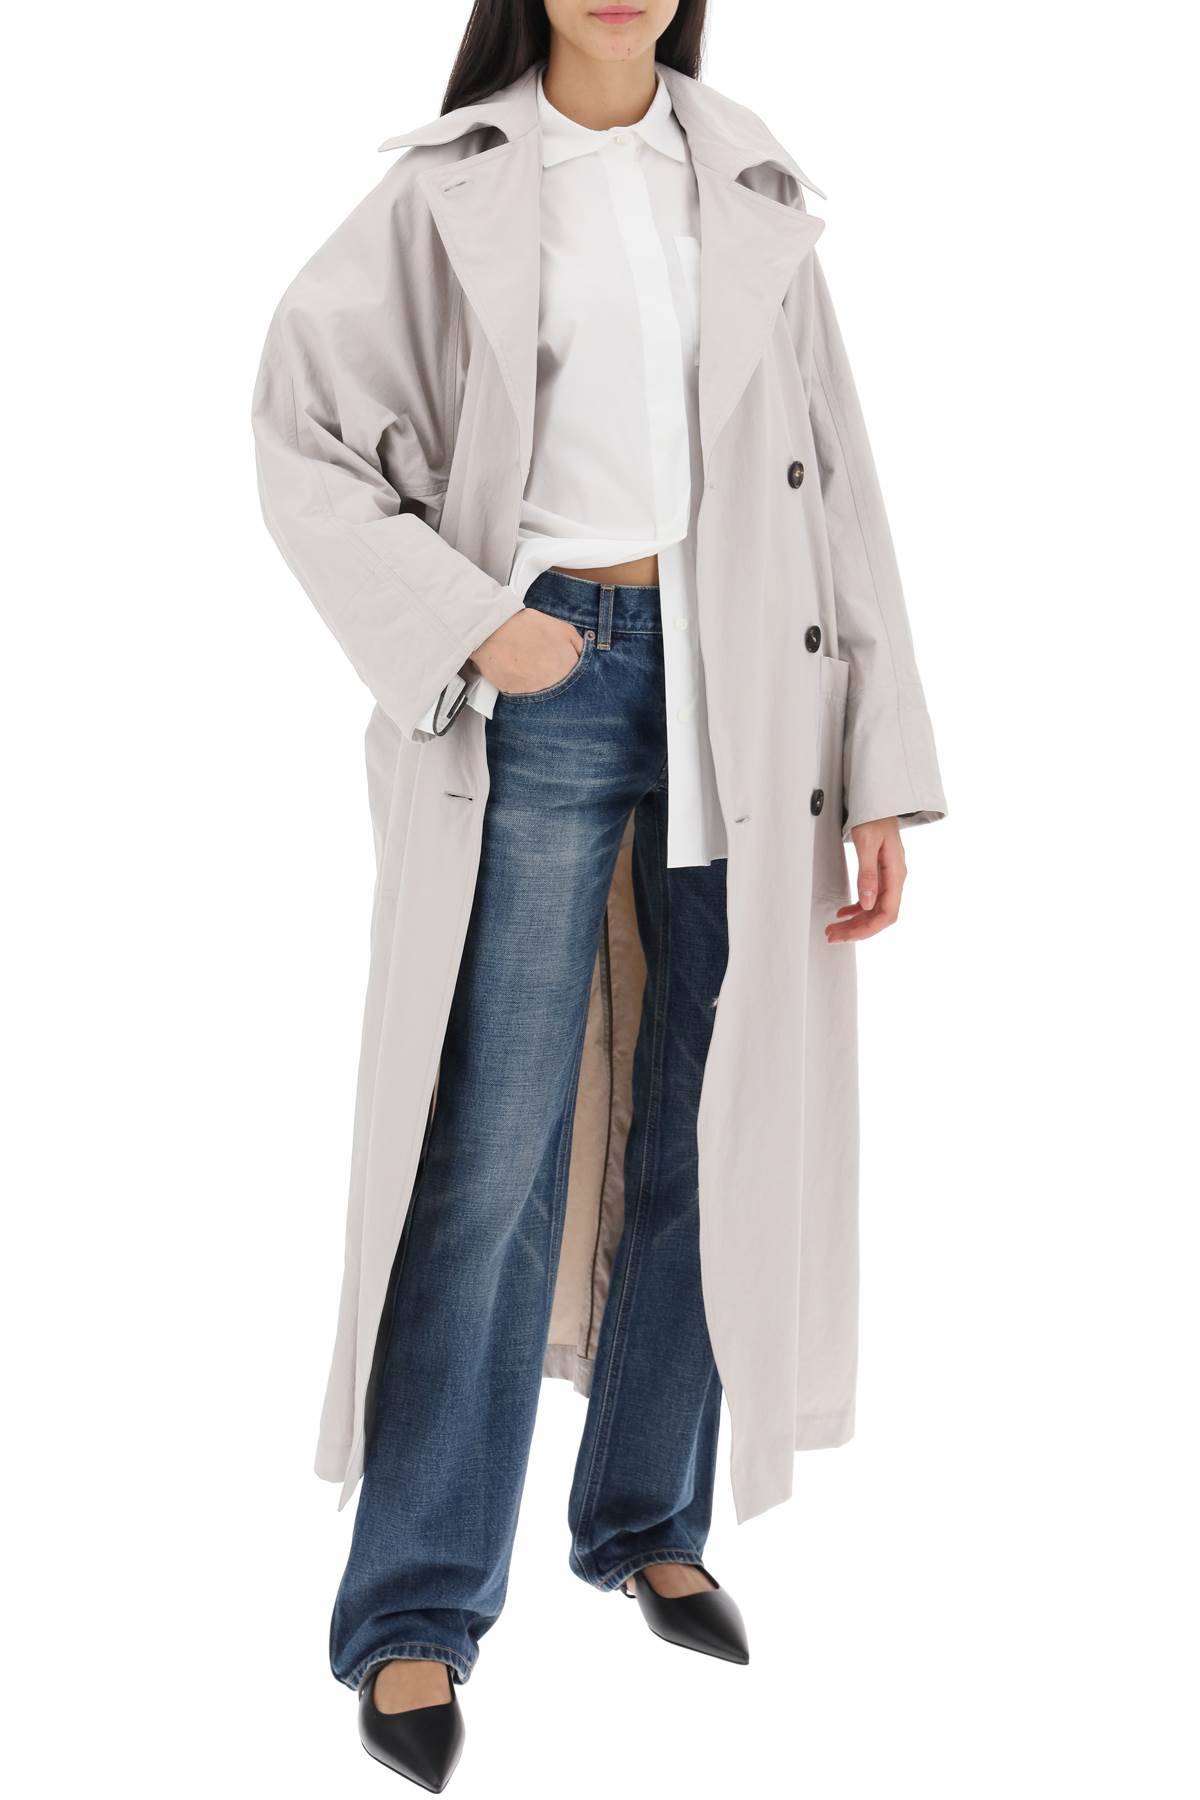 Shop Brunello Cucinelli Wide Sleeve Shirt With Shiny Cuff Details In White